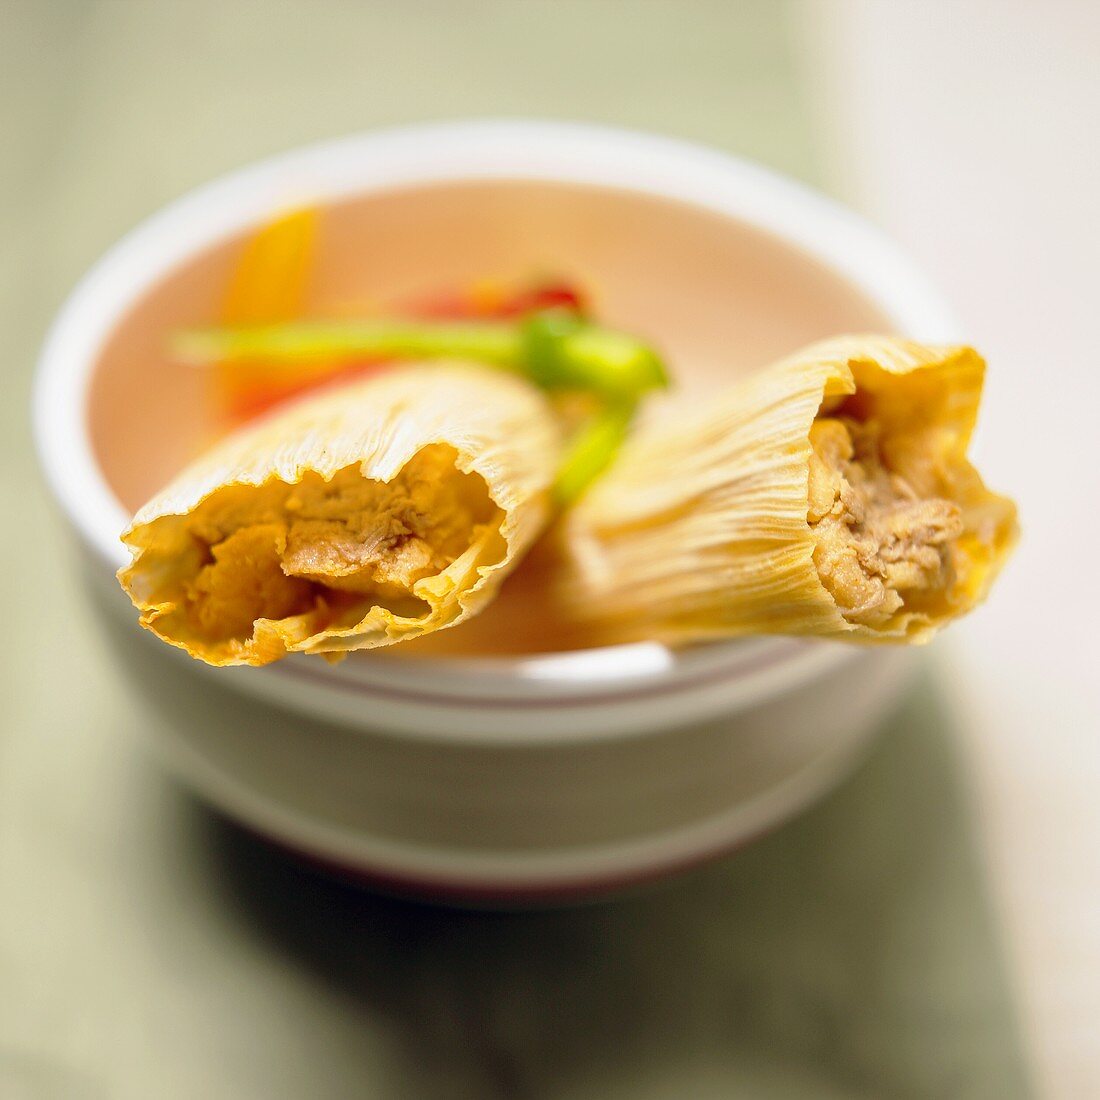 Two filled tamales in a bowl (Mexico)